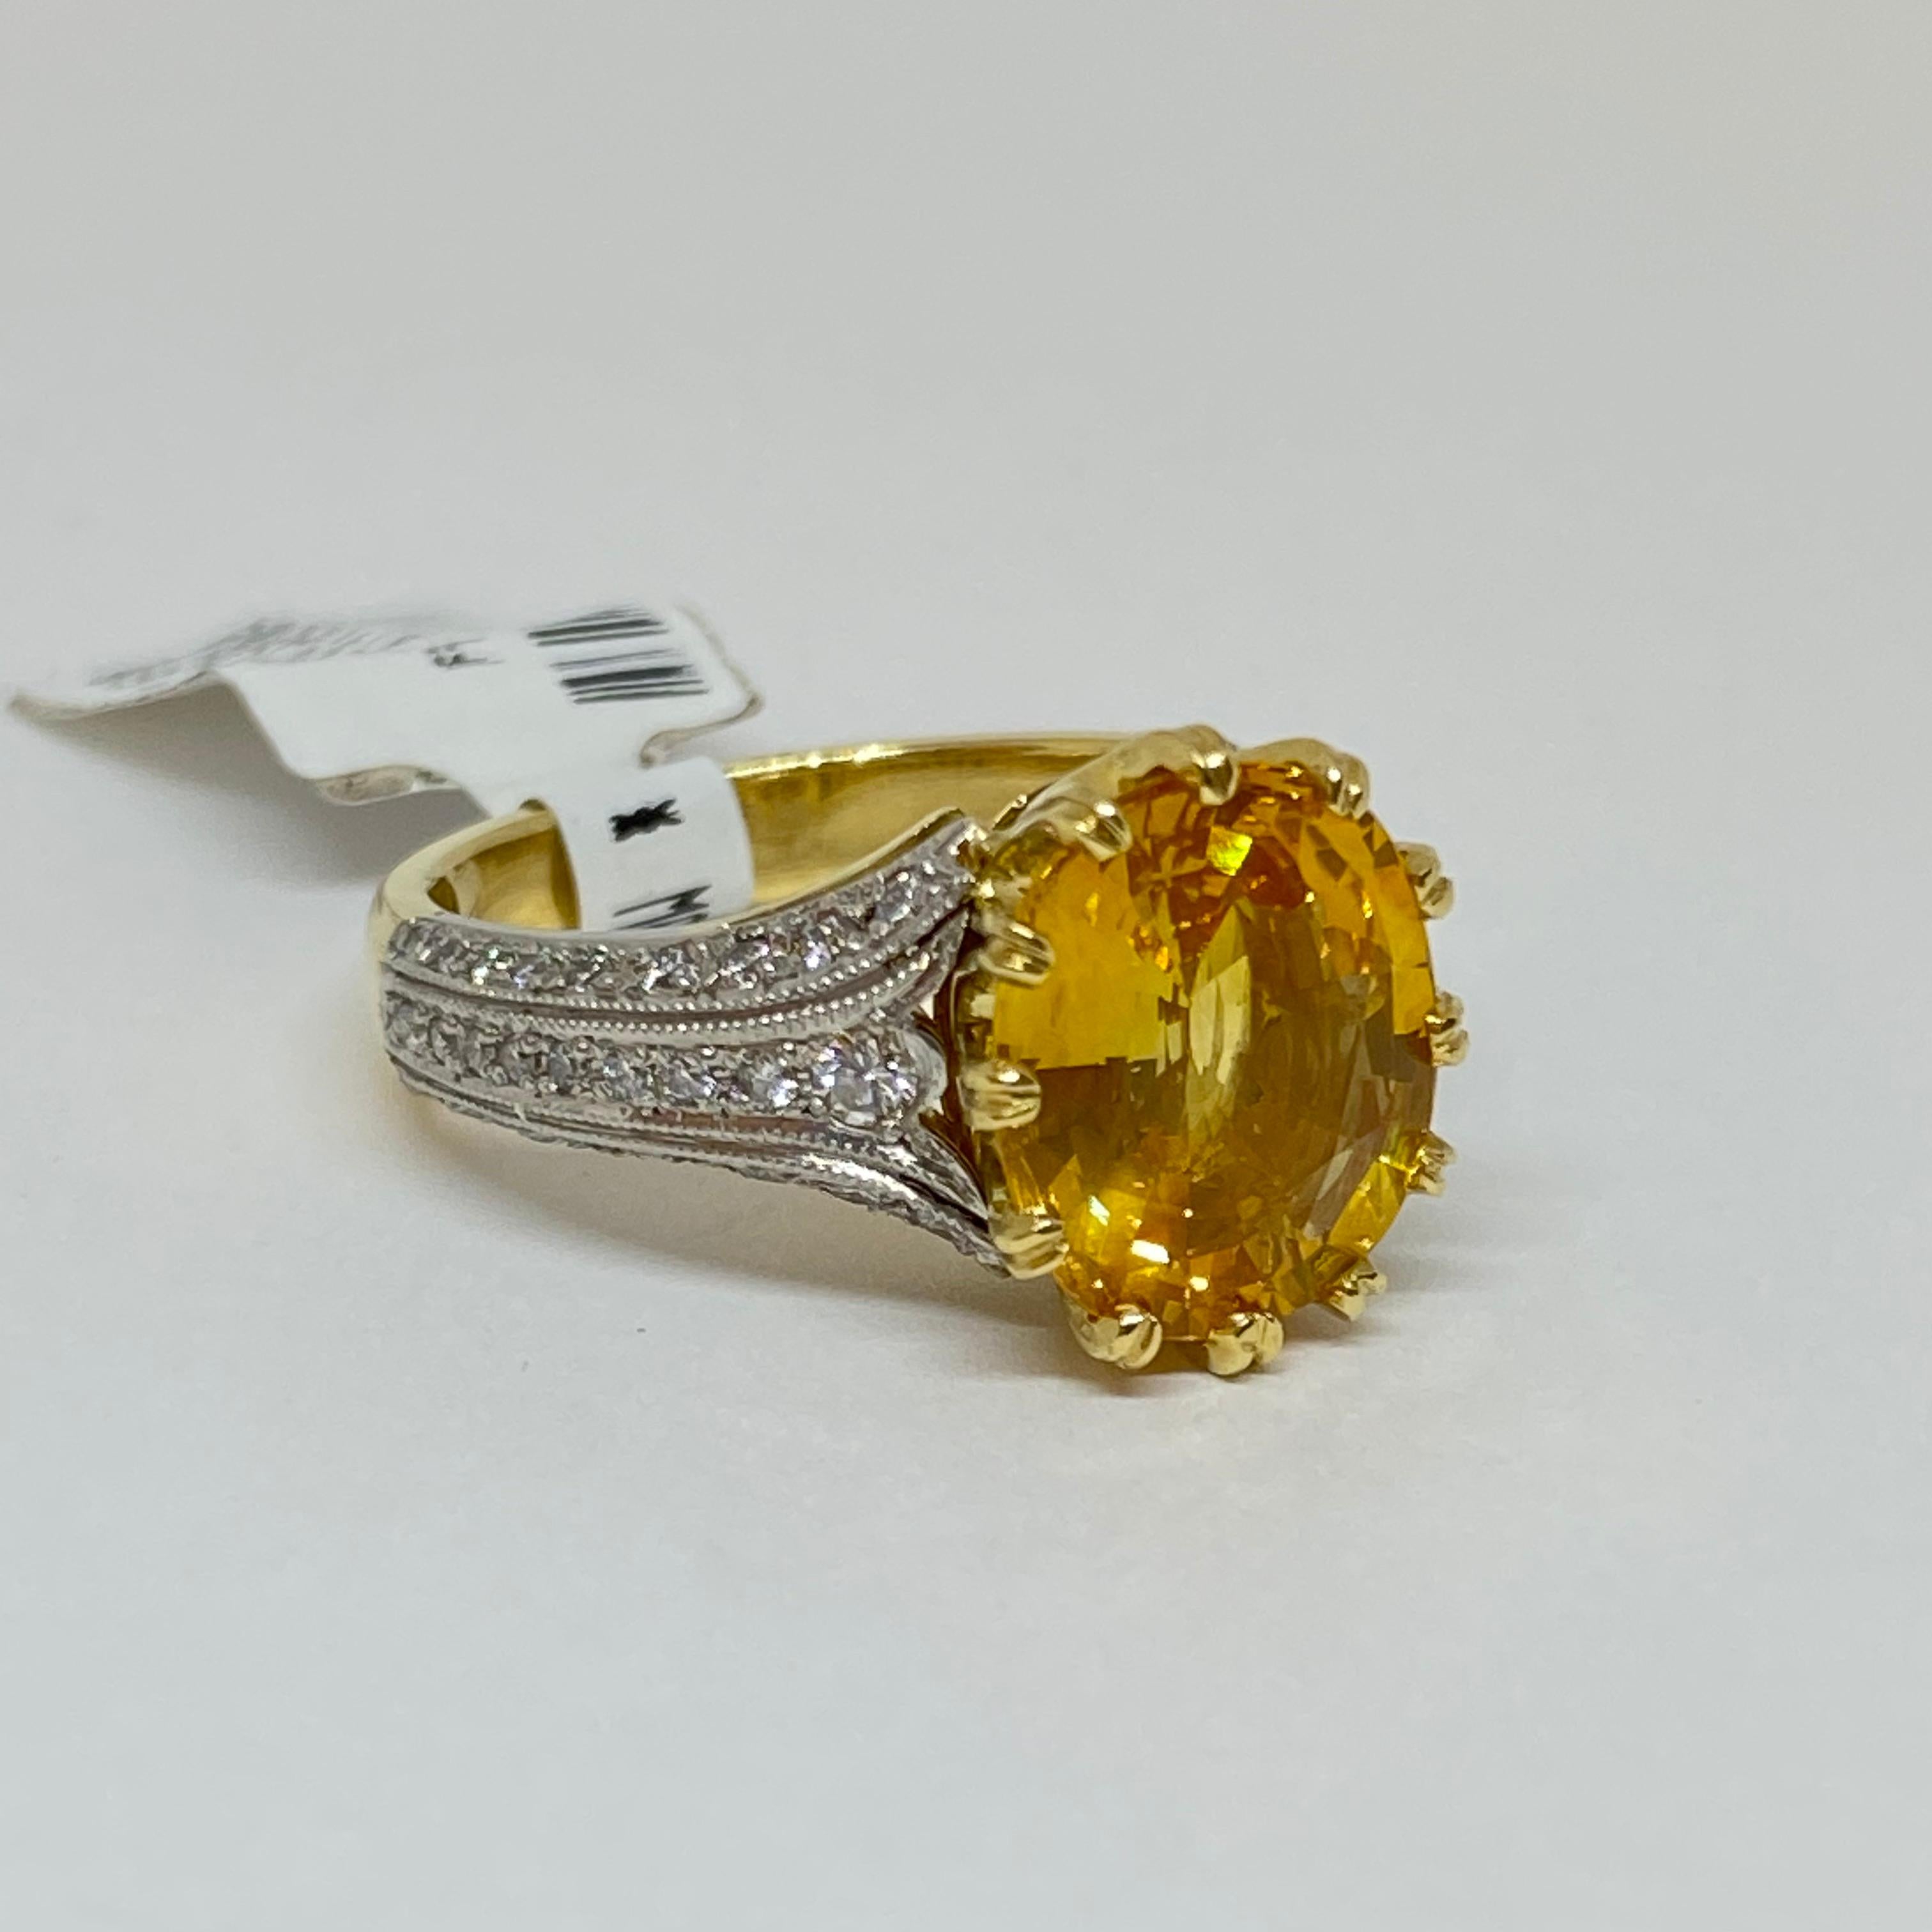 The ring is designed and handmade by Mark Areias Jewelers in 18 karat yellow gold and platinum. The ring contains a natural oval yellow sapphire and round brilliant cut diamonds. The beautiful natural sapphire is set in our signature multi prong